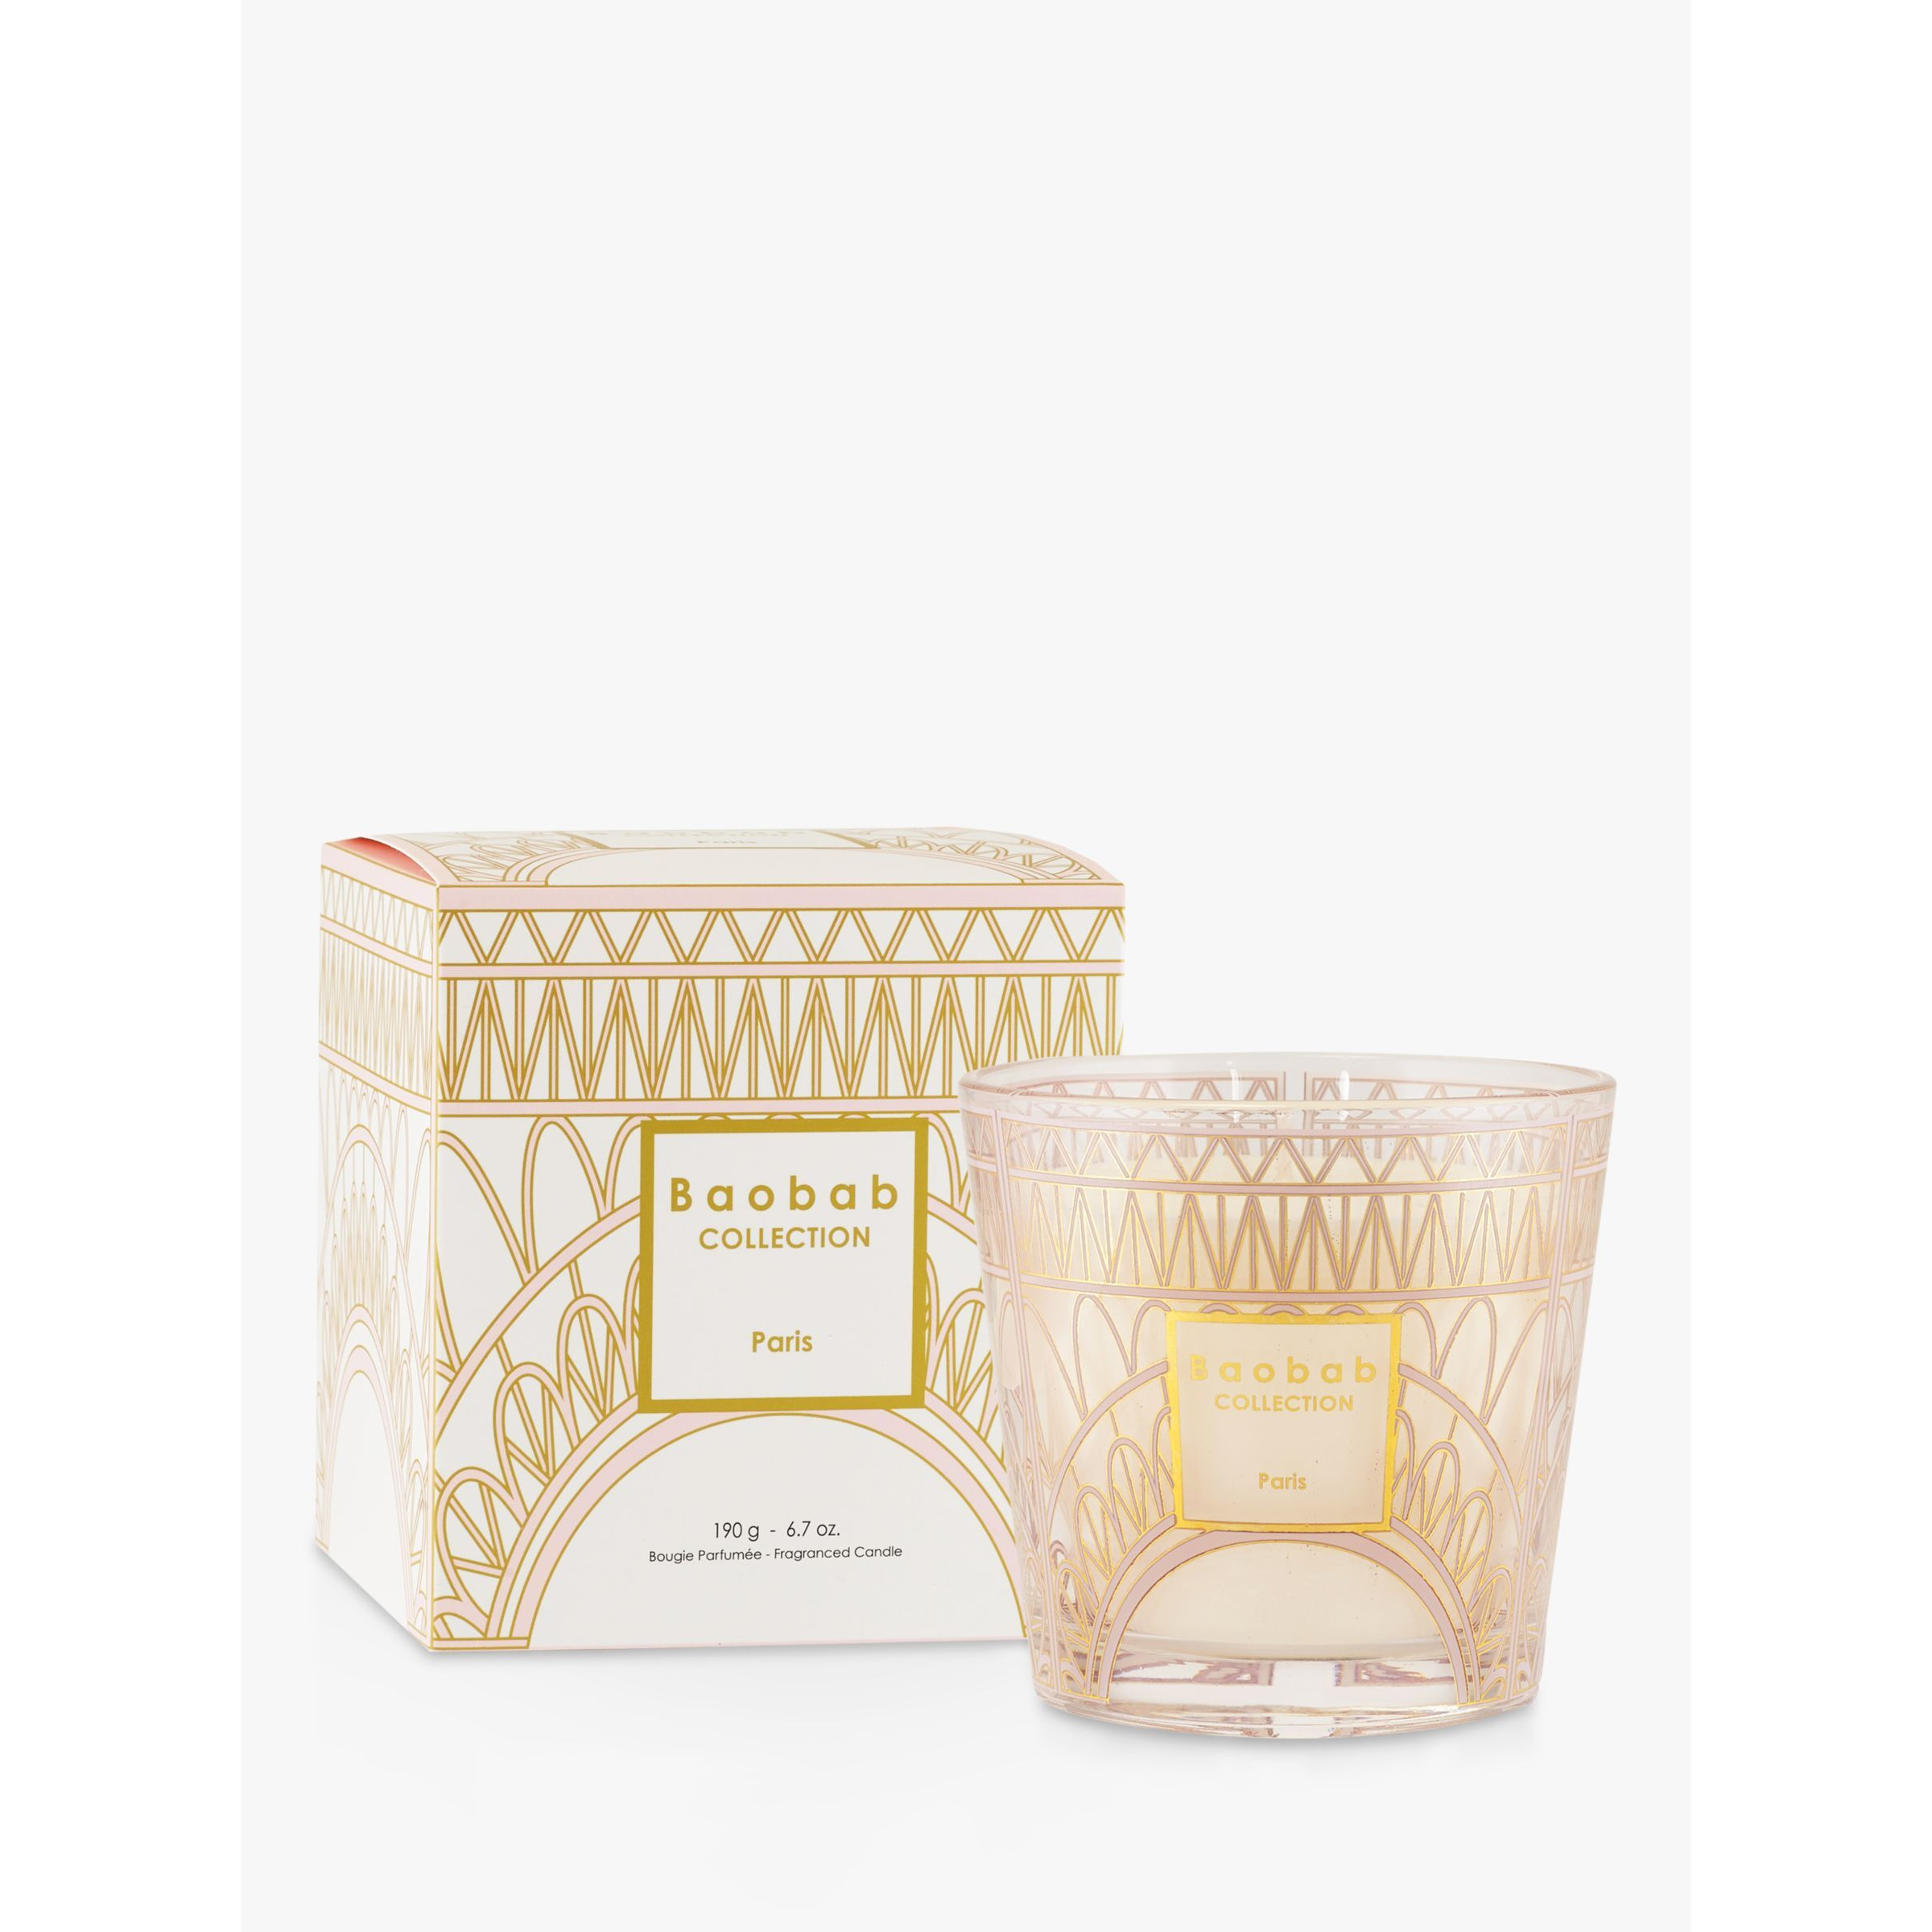 Baobab Collection My First Baobab Paris Scented Candle, 190g - image 1